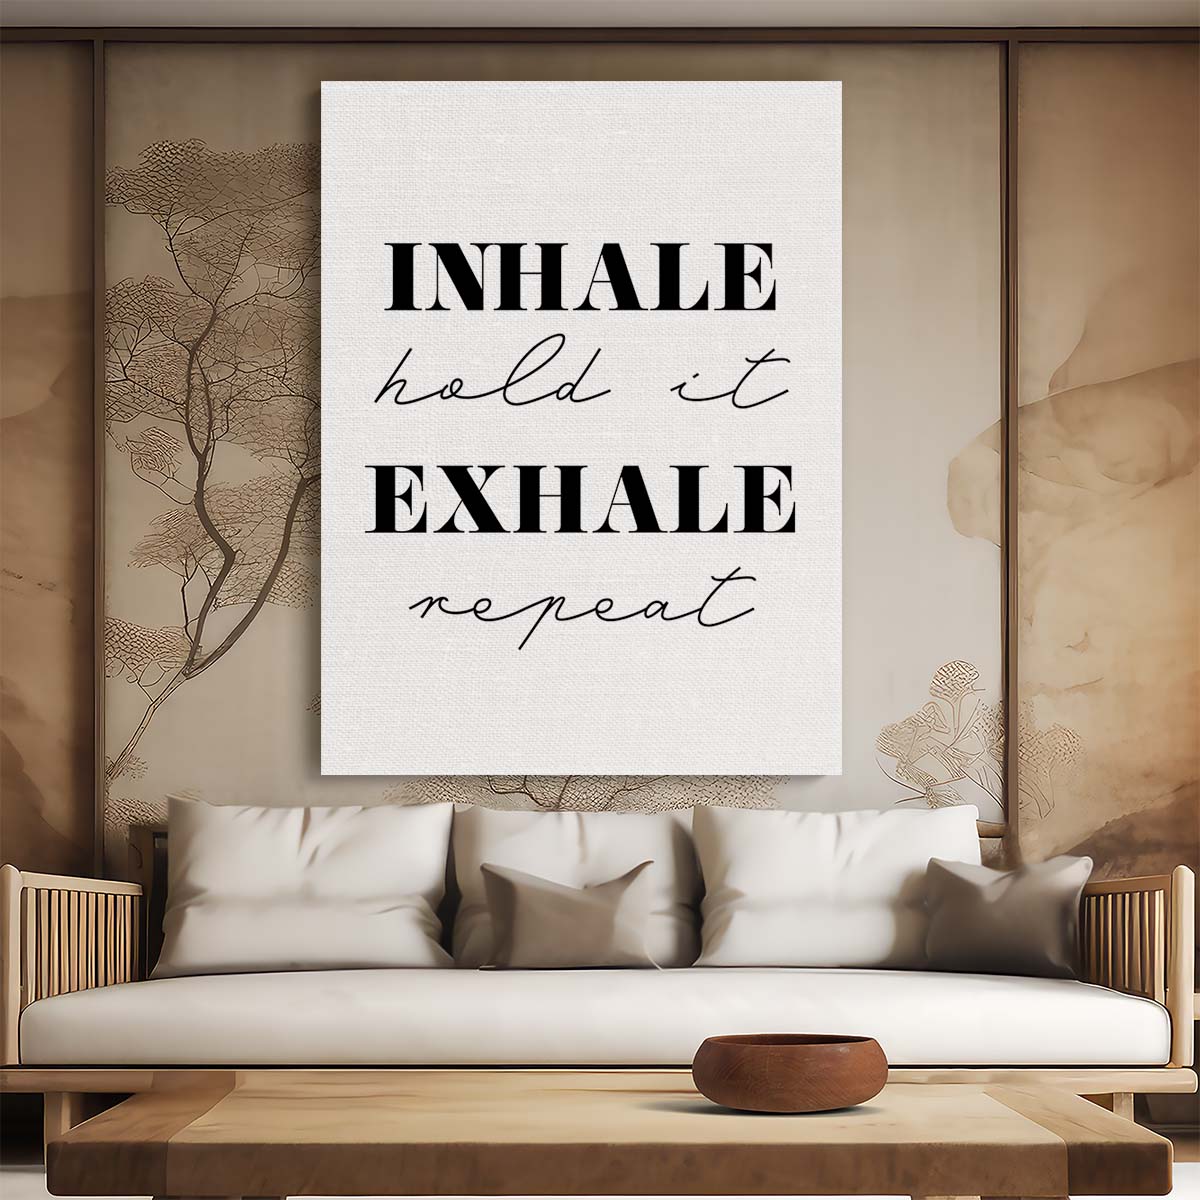 Motivational Breathing Quote Illustration in Black and White Typography by Luxuriance Designs, made in USA